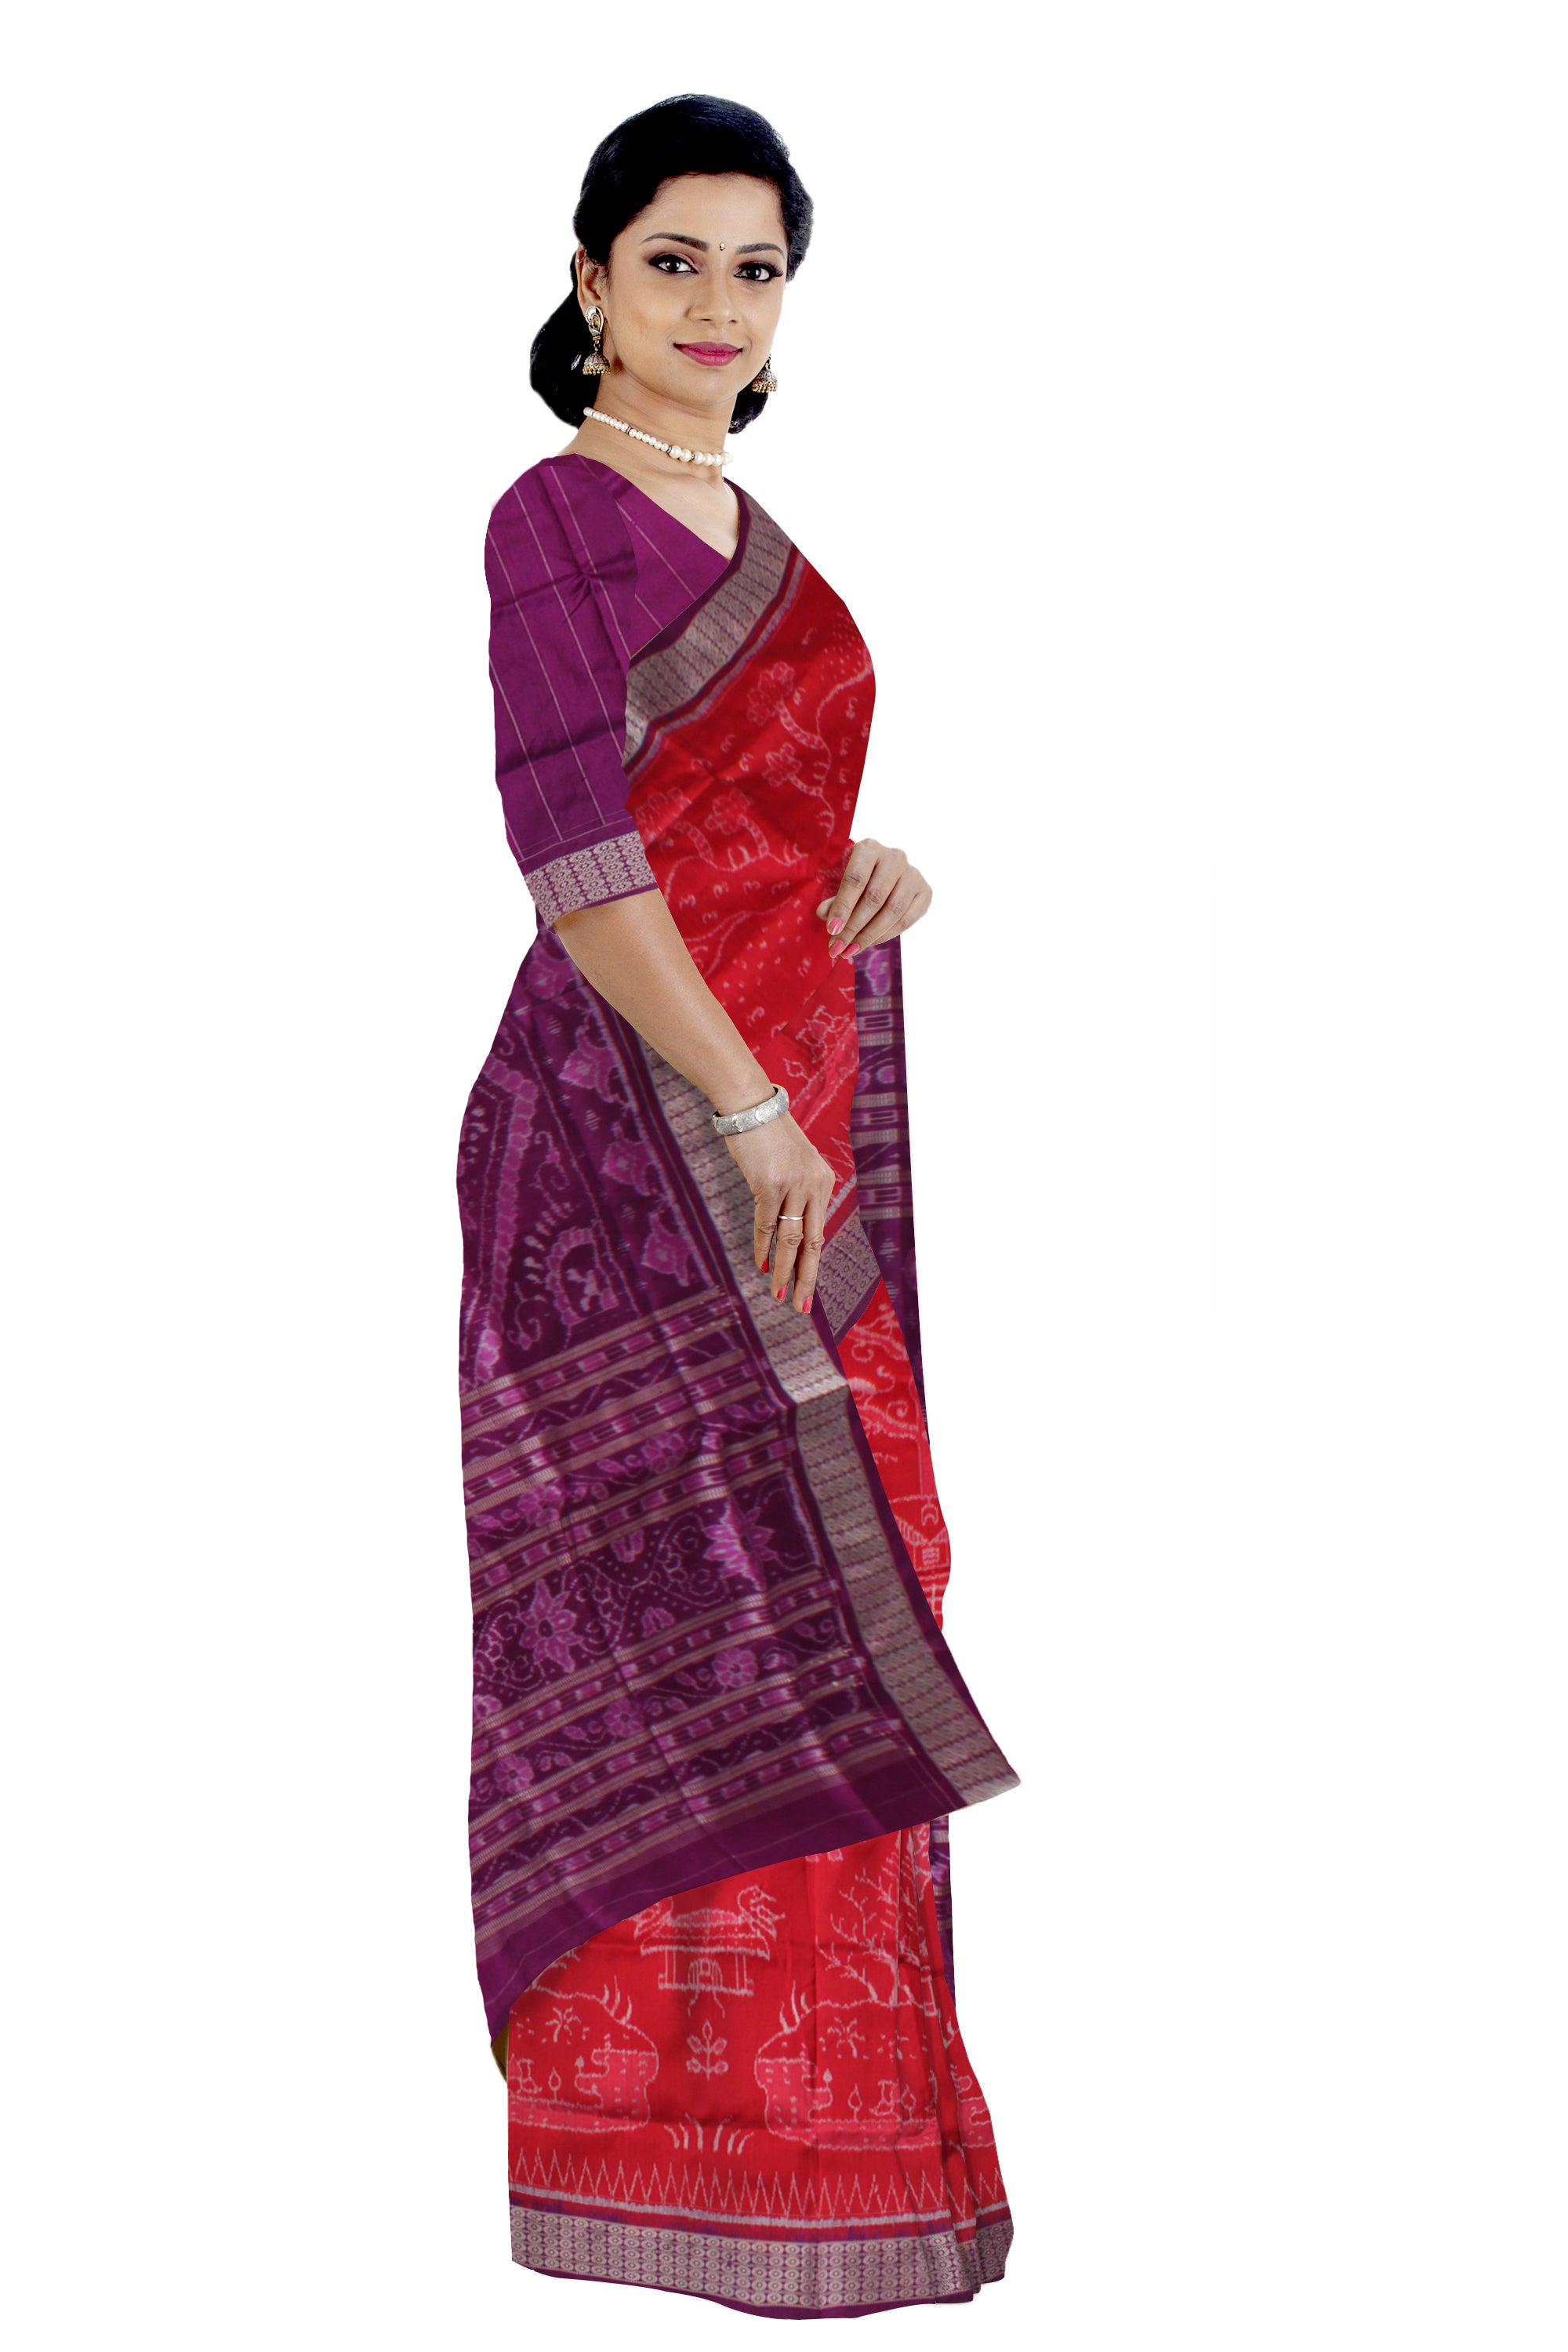 MOST BEAUTIFUL SUNSHINE VILLAGE PATTERN WORKING BODY PURE SILK SAREE IS RED AND PURPLE COLOR BASE.ATTACHED WITH MATCHING BLOUSE PIECE. - Koshali Arts & Crafts Enterprise